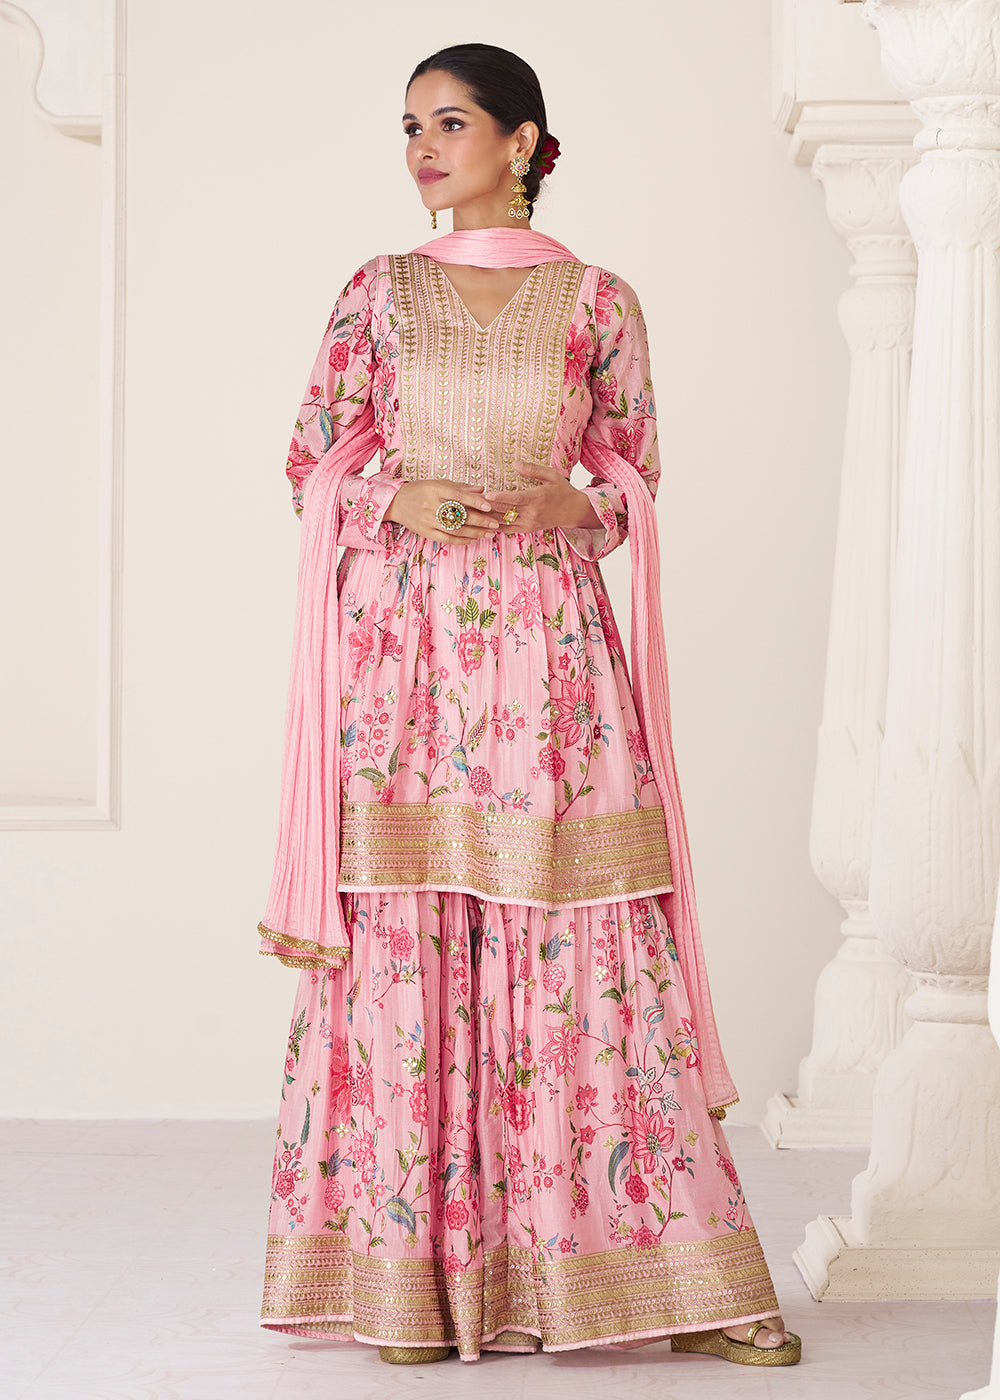 Shop Now Floral Printed Pink Premium Organza Silk Gharara Style Suit Online at Empress Clothing in USA, UK, Canada, Italy & Worldwide.